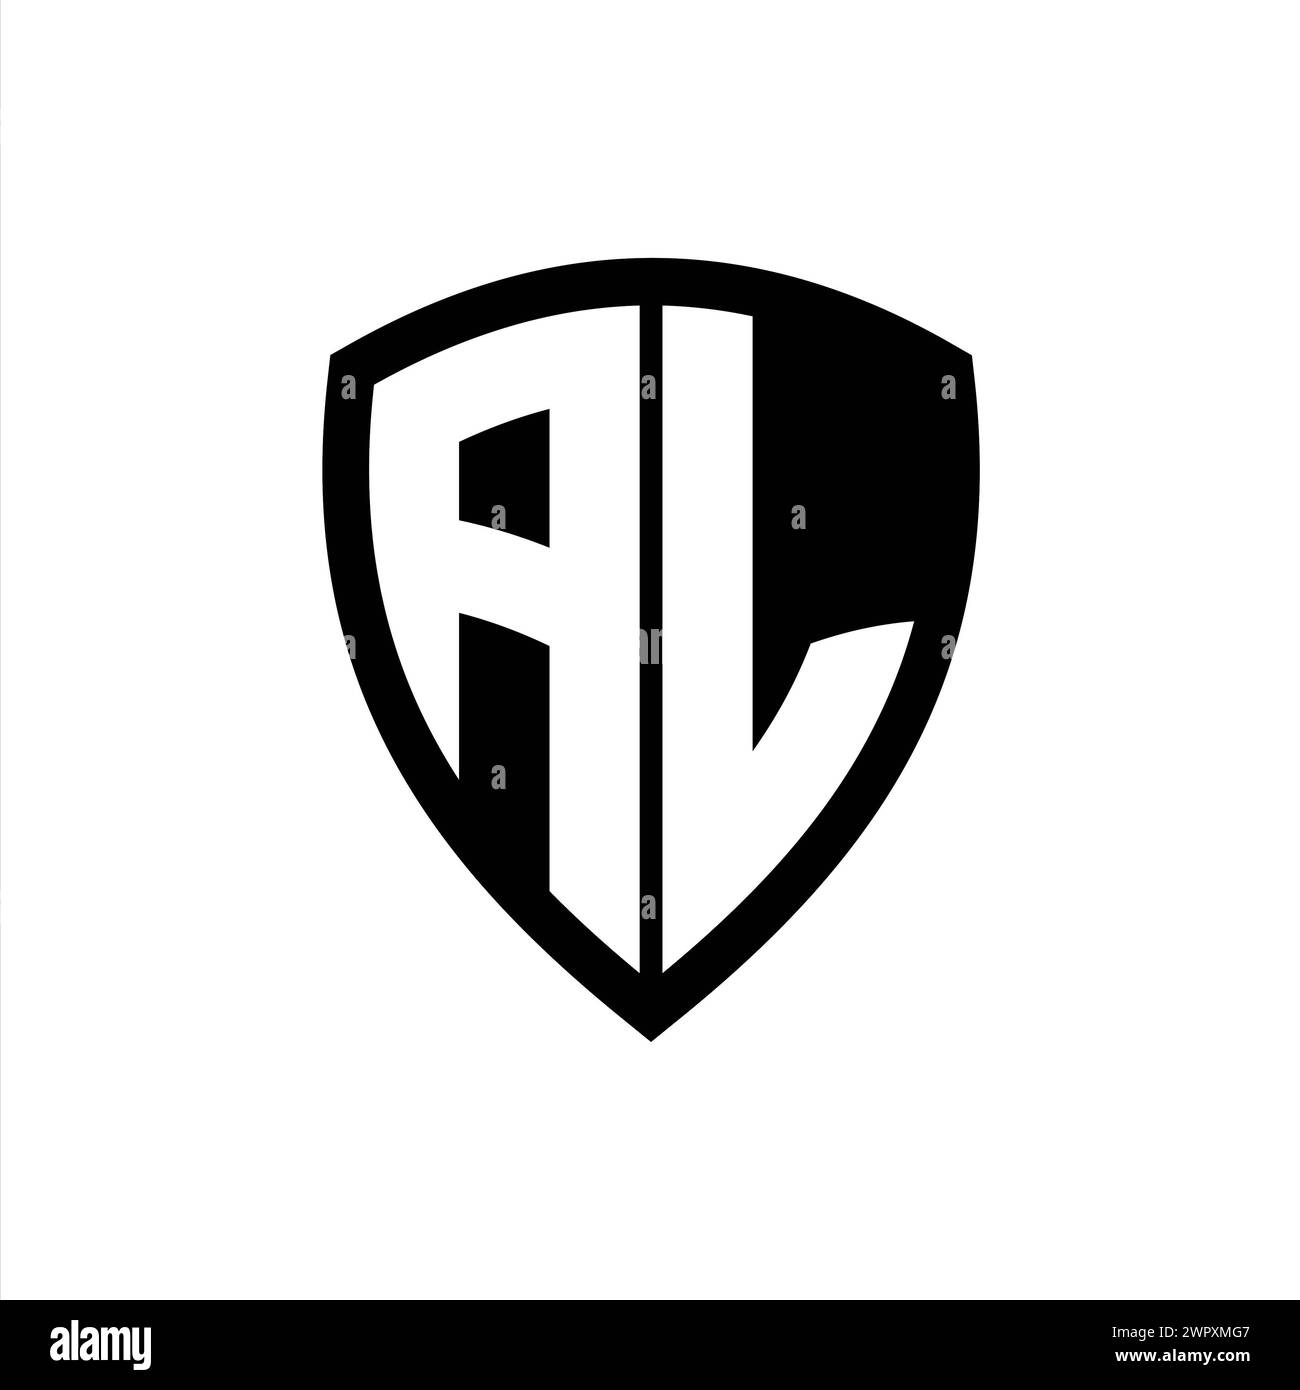 AL monogram logo with bold letters shield shape with black and white color design template Stock Photo